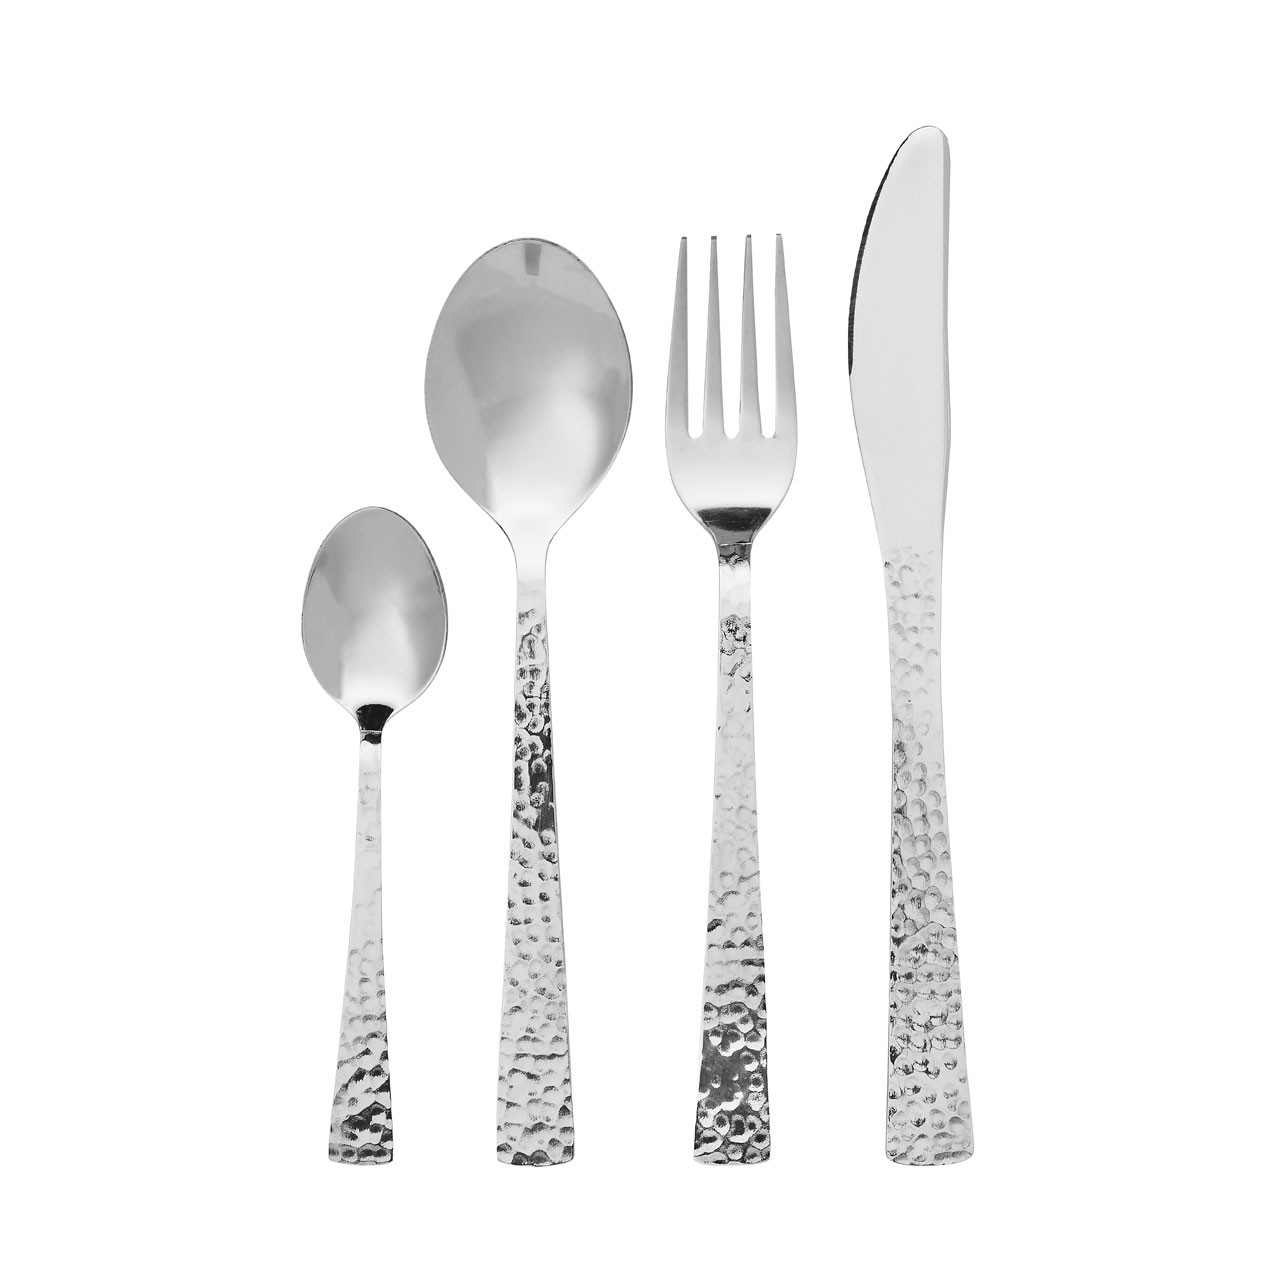 24pc Cutlery Set Stainless Steel Hammered Effect